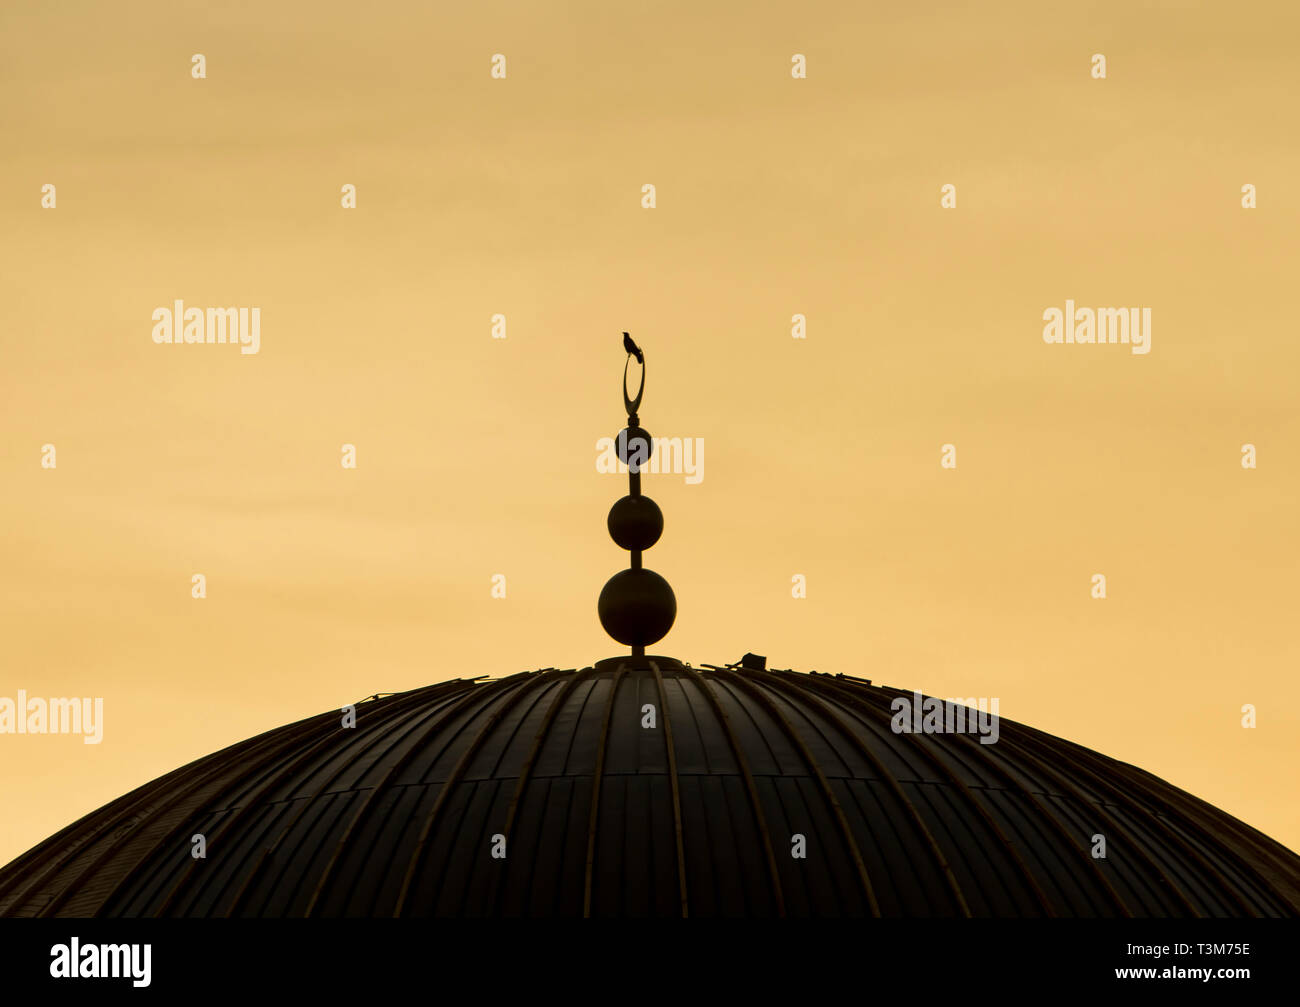 The dome of a mosque under construction visited by a bird under overcast sky. Stock Photo